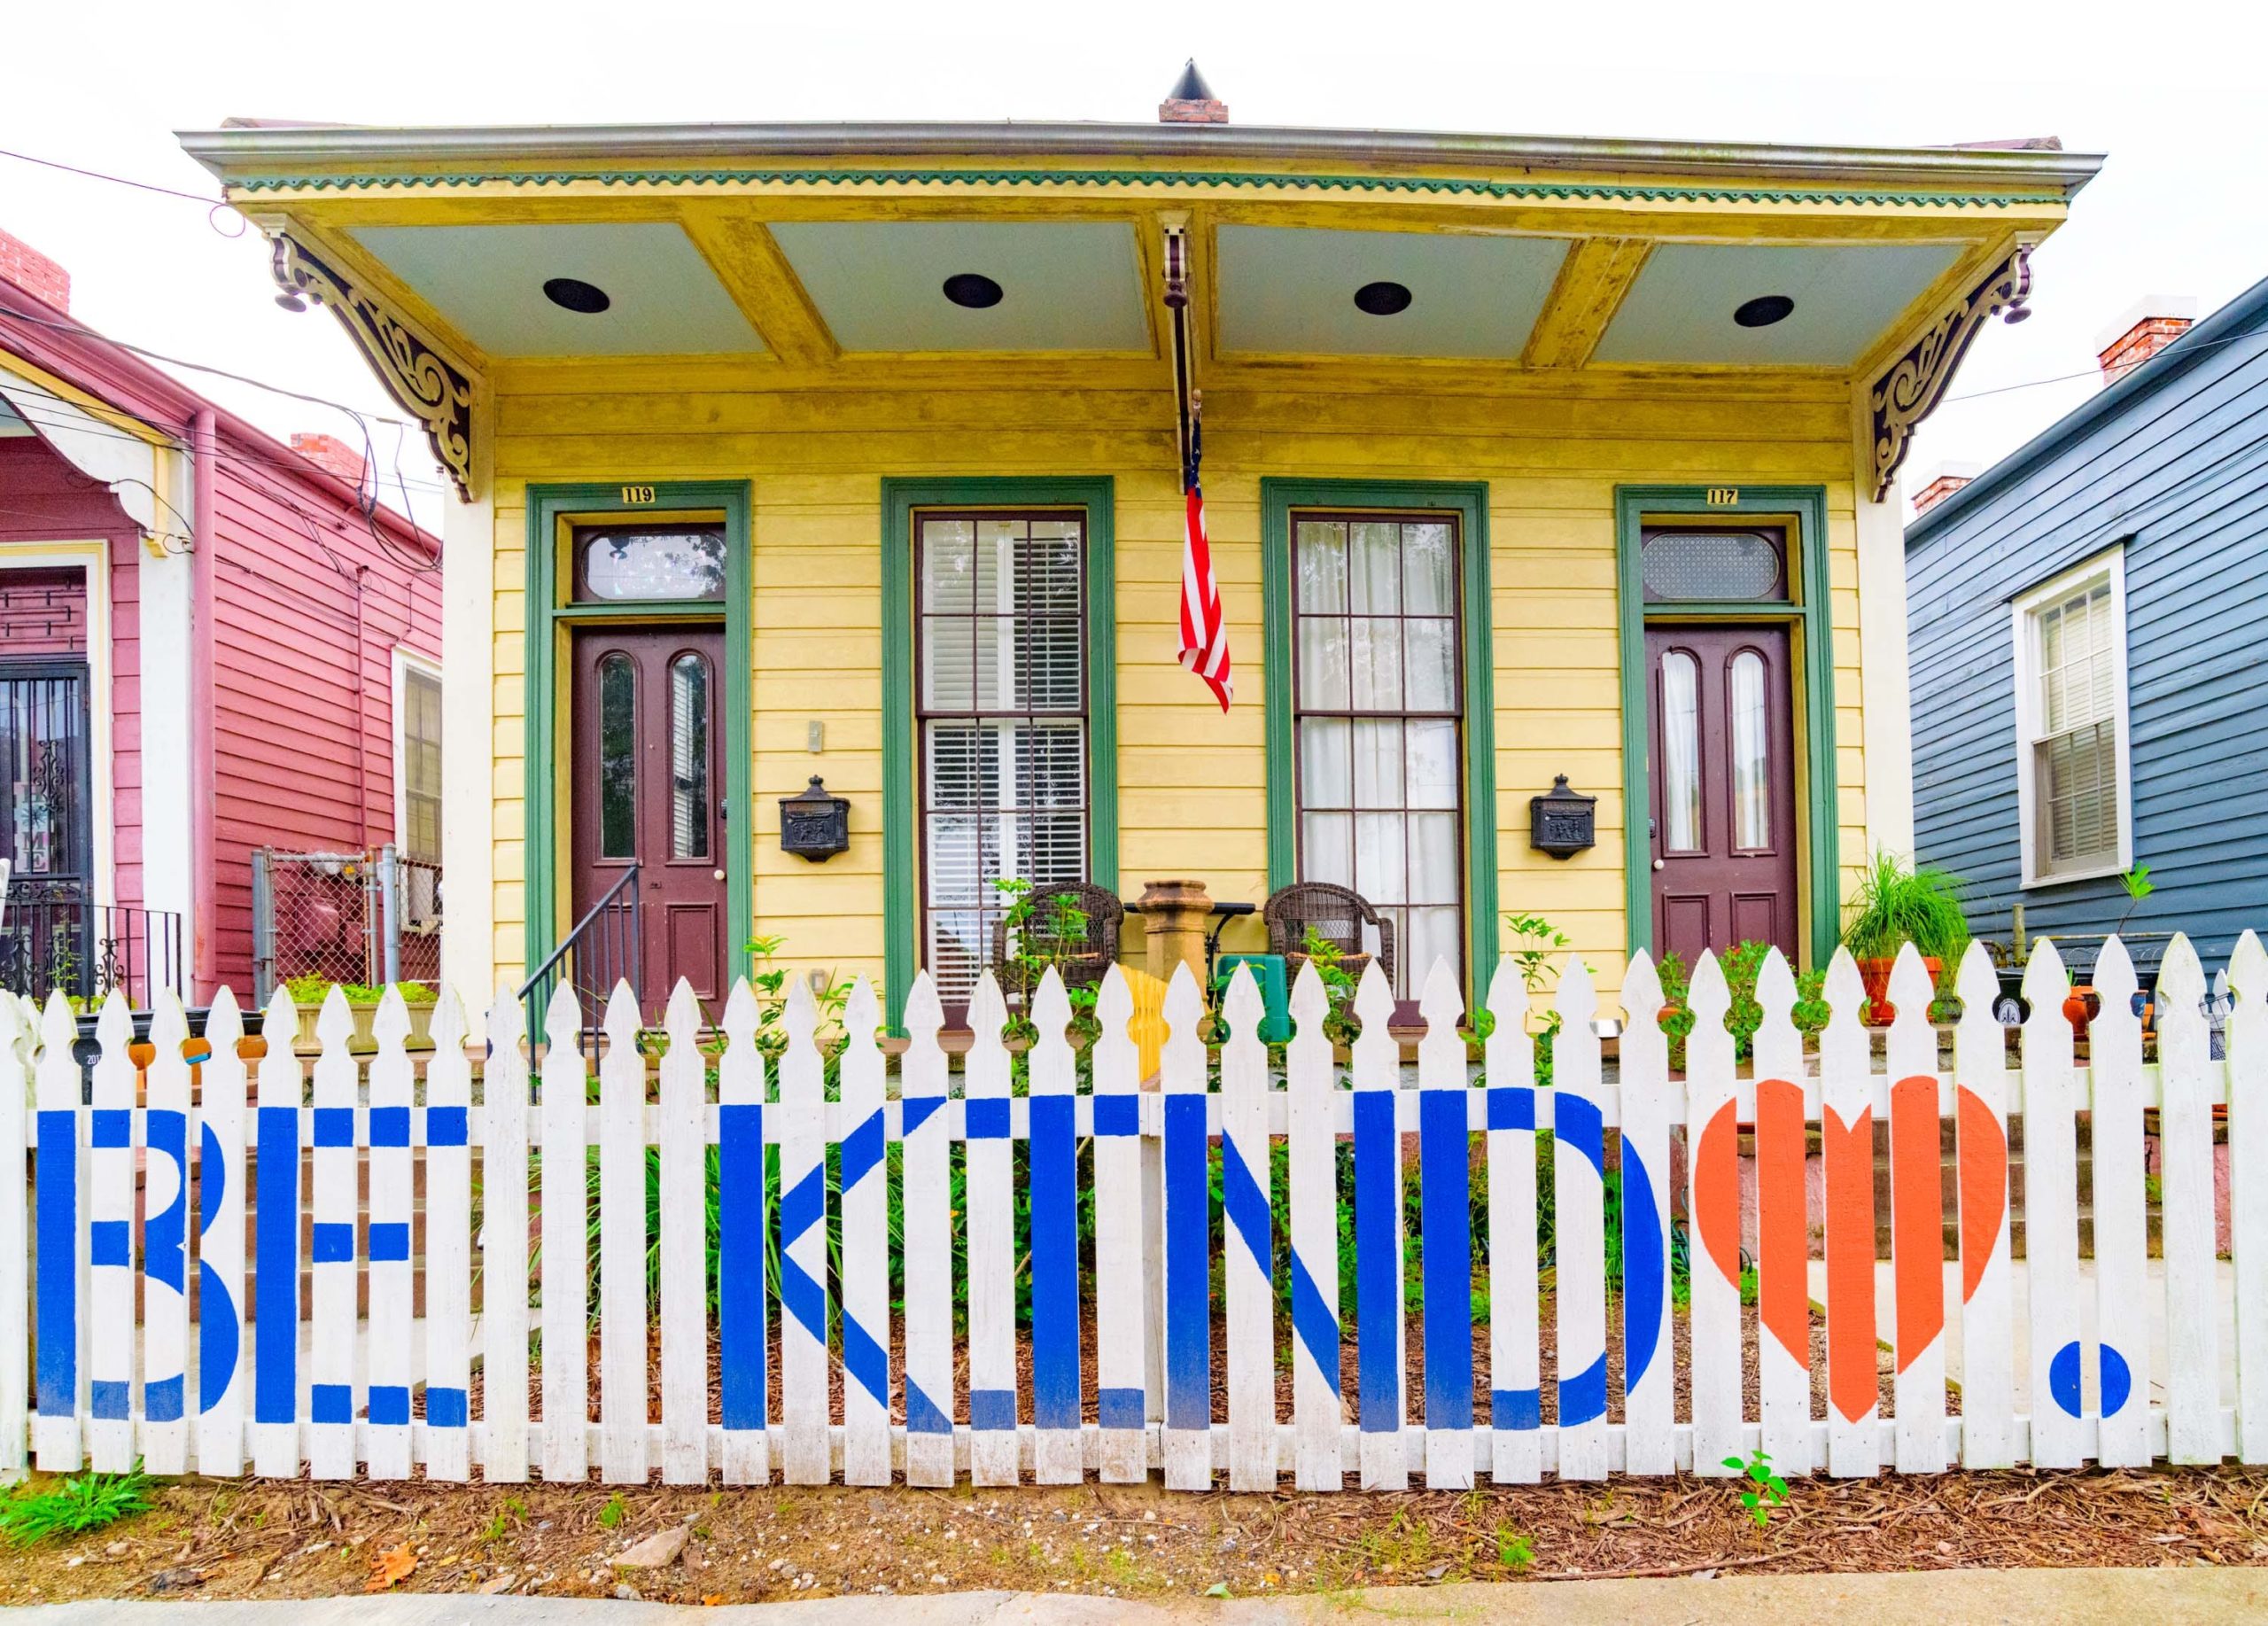 #TheOrnateOutdoors : A white picket fence urges people to “BE KIND ❤️” in the Algiers neighborhood. The neighborhood was colonized by the French in 1719 a year after New Orleans in 1718. One theory for the neighborhood’s name is that it is like the countries of France and Algeria with its capital city, Algiers, that are separated by the Mediterranean Sea, while New Orleans and Algiers are separated by the Mississippi River. It’s also known as the 15th Ward from when the city elected leaders from 17 wards. Though the wards weren’t used after 1912 they are still used to identify neighborhoods in New Orleans like the Upper and Lower 9th Ward. Photo by @MattHintonPhoto for @VeryLocalNOLA
#AlgiersLouisiana #AlgiersNewOrleans #vlnola #Louisiana #NewOrleans #AlgiersPoint #decor #decoratedhomes #ornateorleans #exploreneworleans #ornateoutdoors #bekind #ornateoutdoors #westbank
#TheOrnateOutdoors : A closed Gulf filling station is seen in the Algiers neighborhood of New Orleans. Gulf Oil began with the discovery of the oil at Spindletop in Beaumont, Texas along the Gulf Coast in 1901. In 1984 the company merged with Standard Oil Company of California also known as Chevron and many of the old Gulf stations were closed. The neighborhood was colonized by the French in 1719 a year after New Orleans in 1718. One theory for the neighborhood’s name is that it is like the countries of France and Algeria with its capital city, Algiers, that are separated by the Mediterranean Sea, while New Orleans and Algiers are separated by the Mississippi River. It’s also known as the 15th Ward from when the city elected leaders from 17 wards. Though the wards weren’t used after 1912 they are still used to identify neighborhoods in New Orleans like the Upper and Lower 9th Ward. Photo by @MattHintonPhoto for @VeryLocalNOLA
#AlgiersLouisiana #AlgiersNewOrleans #vlnola #Louisiana #NewOrleans #GulfOil #AlgiersPoint #fleurdelis #decor #decoratedhomes #ornateorleans #exploreneworleans #ornateoutdoors #westbank
#TheOrnateOutdoors : A common problem in New Orleans but especially in the Algiers neighborhood is the subsidence or sinking ground that often leads to potholes as this ornate sign warns. Photo by @MattHintonPhoto for @VeryLocalNOLA
#AlgiersLouisiana #AlgiersNewOrleans #vlnola #Louisiana #NewOrleans #AlgiersPoint #decor #decoratedhomes #ornateorleans #exploreneworleans #ornateoutdoors #potholes #westbank
#TheOrnateOutdoors : A bicycle built for two emerges from a planter in the Algiers neighborhood of New Orleans. One theory for the neighborhood’s name is that it is like the countries of France and Algeria with its capital city, Algiers, that are separated by the Mediterranean Sea, while New Orleans and Algiers are separated by the Mississippi River. Photo by @MattHintonPhoto for @VeryLocalNOLA
#AlgiersLouisiana #AlgiersNewOrleans #vlnola #Louisiana #NewOrleans #AlgiersPoint #decor #decoratedhomes #ornateorleans #exploreneworleans #ornateoutdoors #tandembicycle  #westbank
#TheOrnateOutdoors : These piano-key stairs and painted walls featuring a New Orleans jazz band and second line were created by African-American artist Charles Gillam, @charlesandsusangillam_ , and the stairs are an entrance to top of the levee walking path on the West Bank of the Mississippi River in the Algiers neighborhood. Algiers was home to African-American jazz pioneers and rhythm and blues. Photo by @MattHintonPhoto for @VeryLocalNOLA
#AlgiersLouisiana #AlgiersNewOrleans #vlnola #Louisiana #NewOrleans #AlgiersPoint #decor #decoratedhomes #ornateorleans #exploreneworleans #ornateoutdoors #charlesgillam #folkart #jazzband #secondline #westbank
#TheOrnateOutdoors : A biplane appears to fly the blue sky reflected in a window in the Algiers neighborhood of New Orleans. One theory for the neighborhood’s name is that it is like the countries of France and Algeria with its capital city, Algiers, that are separated by the Mediterranean Sea, while New Orleans and Algiers are separated by the Mississippi River. Photo by @MattHintonPhoto for @VeryLocalNOLA
#AlgiersLouisiana #AlgiersNewOrleans #vlnola #Louisiana #NewOrleans #AlgiersPoint #decor #decoratedhomes #ornateorleans #exploreneworleans #ornateoutdoors #biplane #modelplane #westbank
#TheOrnateOutdoors : The outside of home in New Orleans is decorated with the signs for the #SayTheirNames movement. The movement started in 2014 with the hashtag #SayHerName by the African American Policy Forum that sought to bring awareness to the often invisible names and stories of black people who have been victimized by police violence. Photo by @MattHintonPhoto for @VeryLocalNOLA
#AlgiersLouisiana #AlgiersNewOrleans #vlnola #Louisiana #NewOrleans #AlgiersPoint #decoratedhomes #ornateorleans #ornateoutdoors  #westbank #SayTheirNames #BlackLivesMatter #SayHerName
#TheOrnateOutdoors :The Bird-of-paradise flower, Strelitzia reginae, is native to South Africa but is on display in the Algiers neighborhood of New Orleans. Photo by @MattHintonPhoto for @VeryLocalNOLA
#AlgiersLouisiana #AlgiersNewOrleans #vlnola #Louisiana #NewOrleans #AlgiersPoint #decor #decoratedhomes #ornateorleans #exploreneworleans #ornateoutdoors #birdofparadiseflower #birdofparadise
#TheOrnateOutdoors : A couple in Algiers changes the decorations of their home depending on the season with this set representing Summer. The flowers, flamingos, butterflies, and other plants and animals including  some live birds in the blue birdcage in the shade. Photo by @MattHintonPhoto for @VeryLocalNOLA
#AlgiersLouisiana #AlgiersNewOrleans #vlnola #Louisiana #NewOrleans #AlgiersPoint #decor #decoratedhomes #ornateorleans #exploreneworleans #ornateoutdoors #flamingos #birds #butterflies  #summertime #westbank